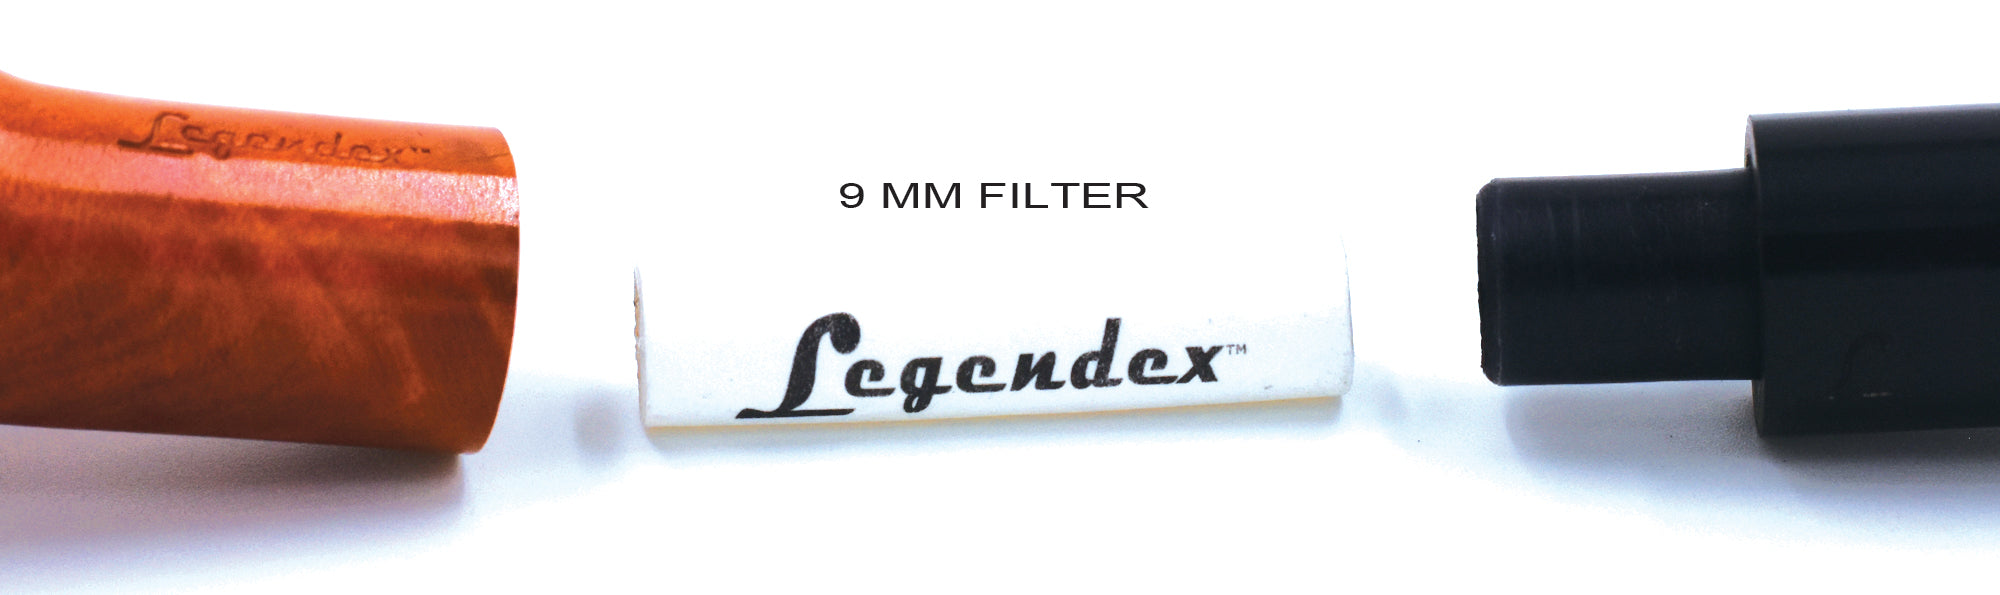 LEGENDEX® LASCALA* Plexiglass Mouthpiece 9 MM Filtered Briar Smoking Pipe Made In Italy 01-08-710